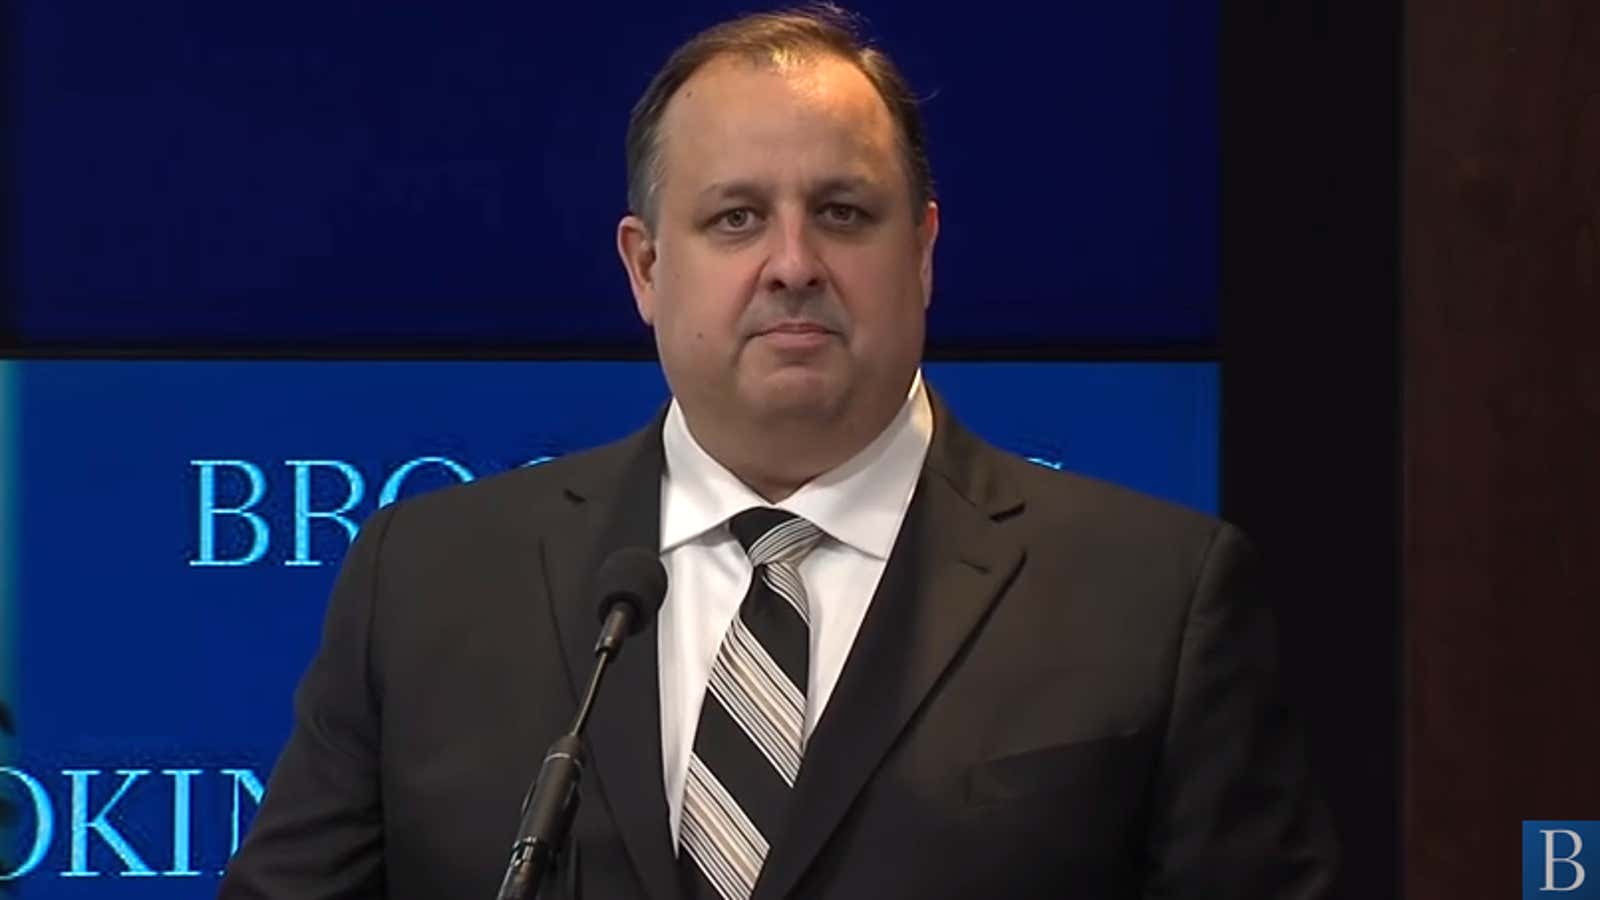 Walter Shaub, freed to push for change from the outside.